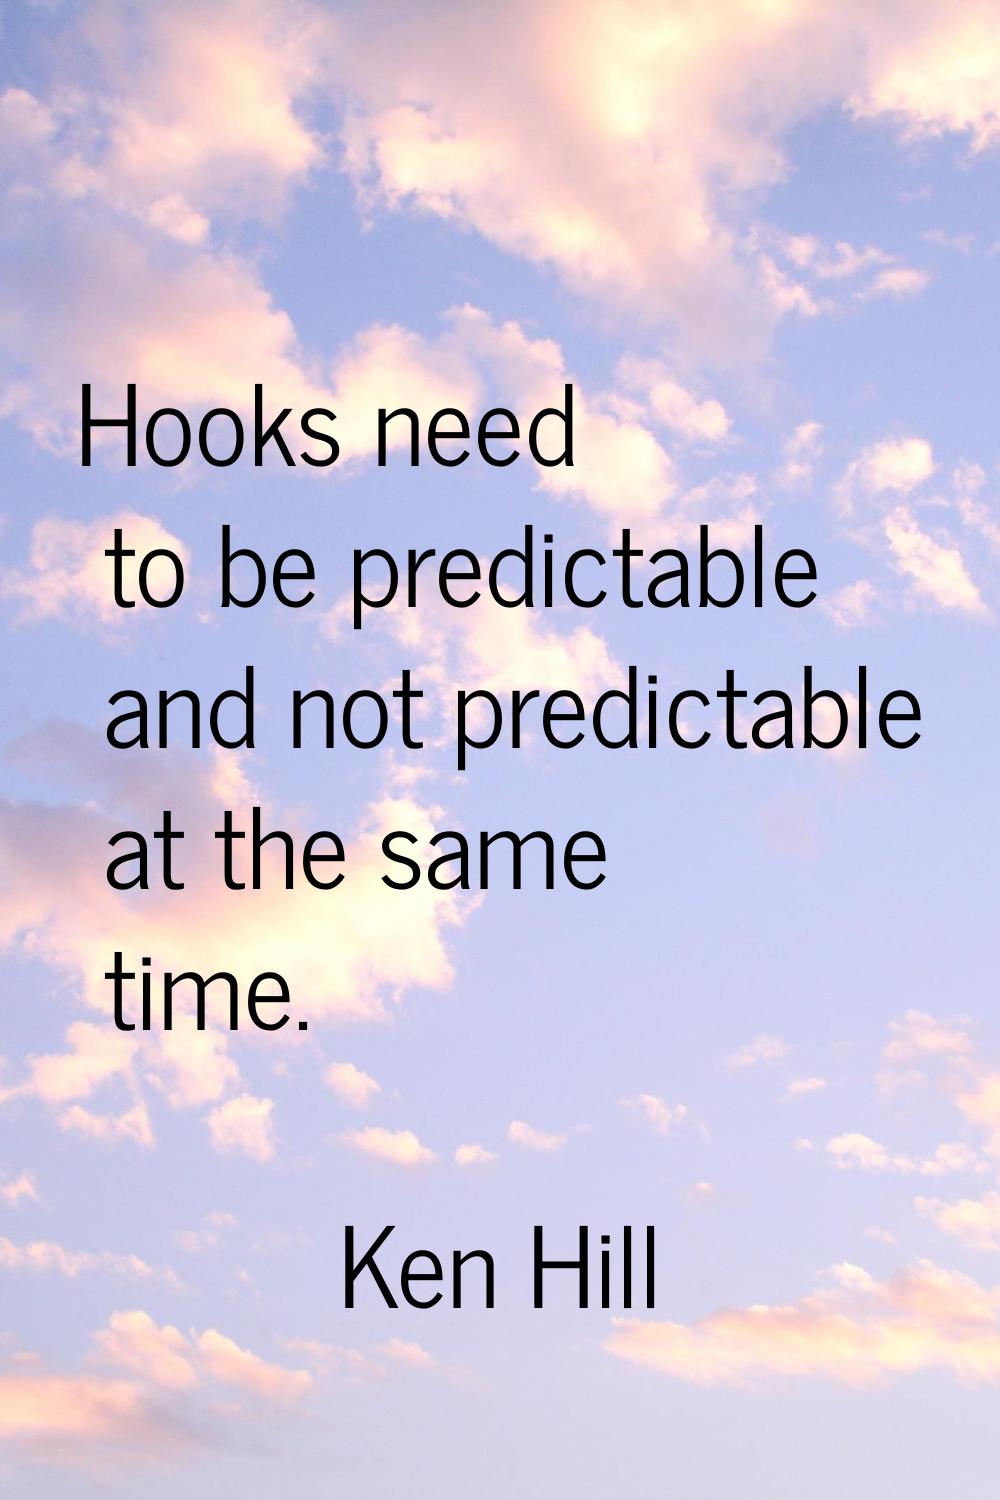 Hooks need to be predictable and not predictable at the same time.